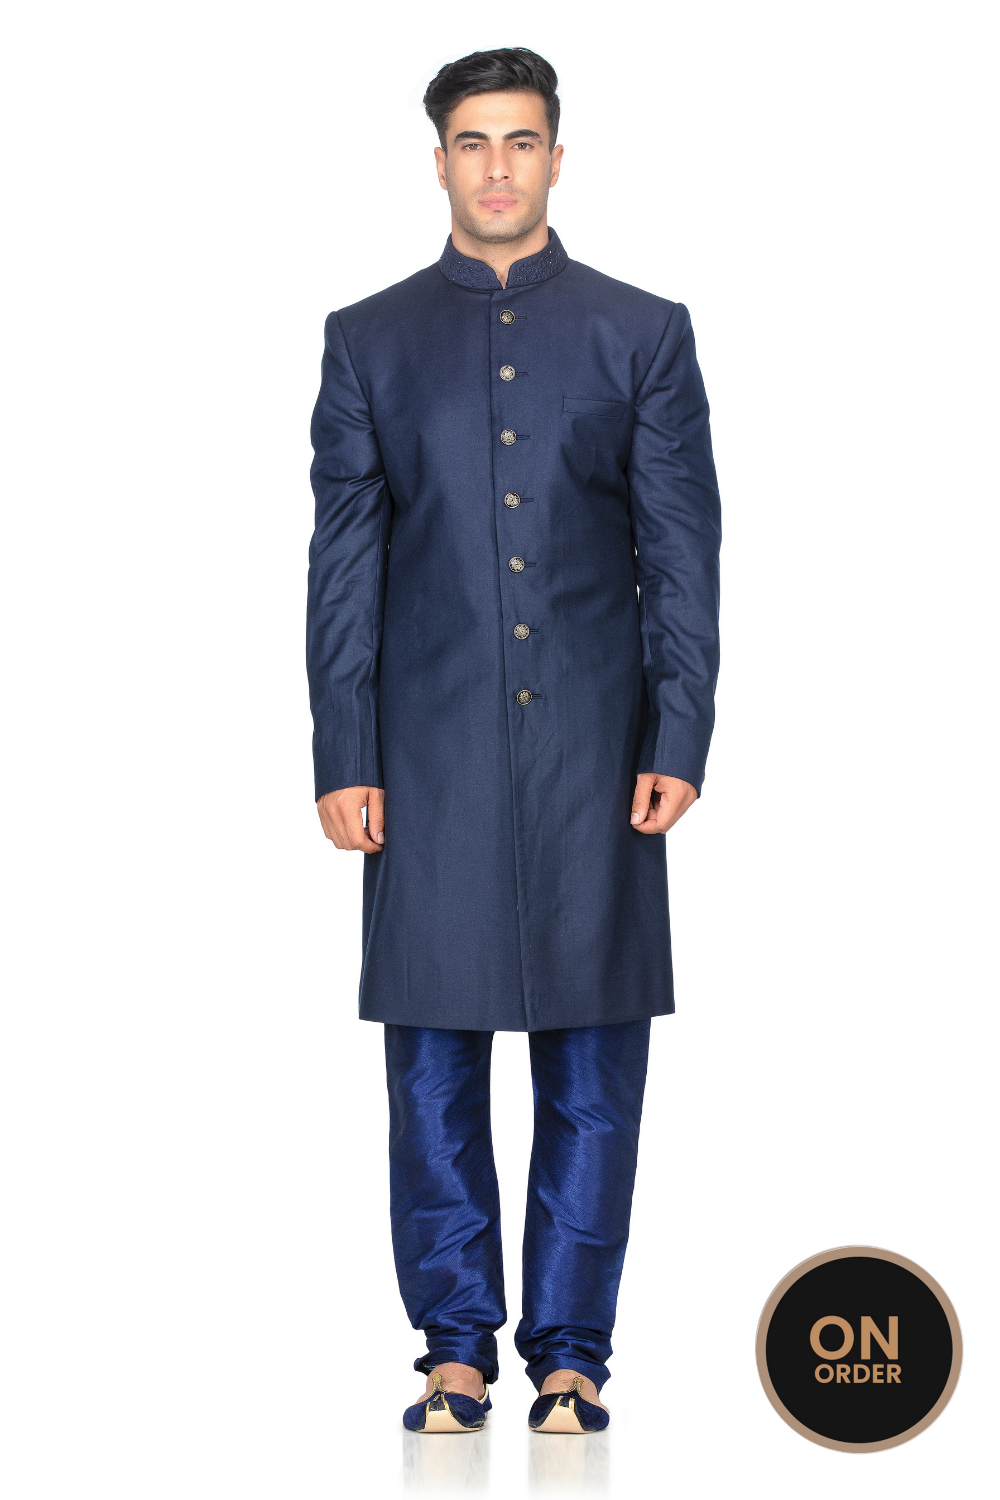 STYLISH NAVY BLUE QUILTED INDO WESTERN